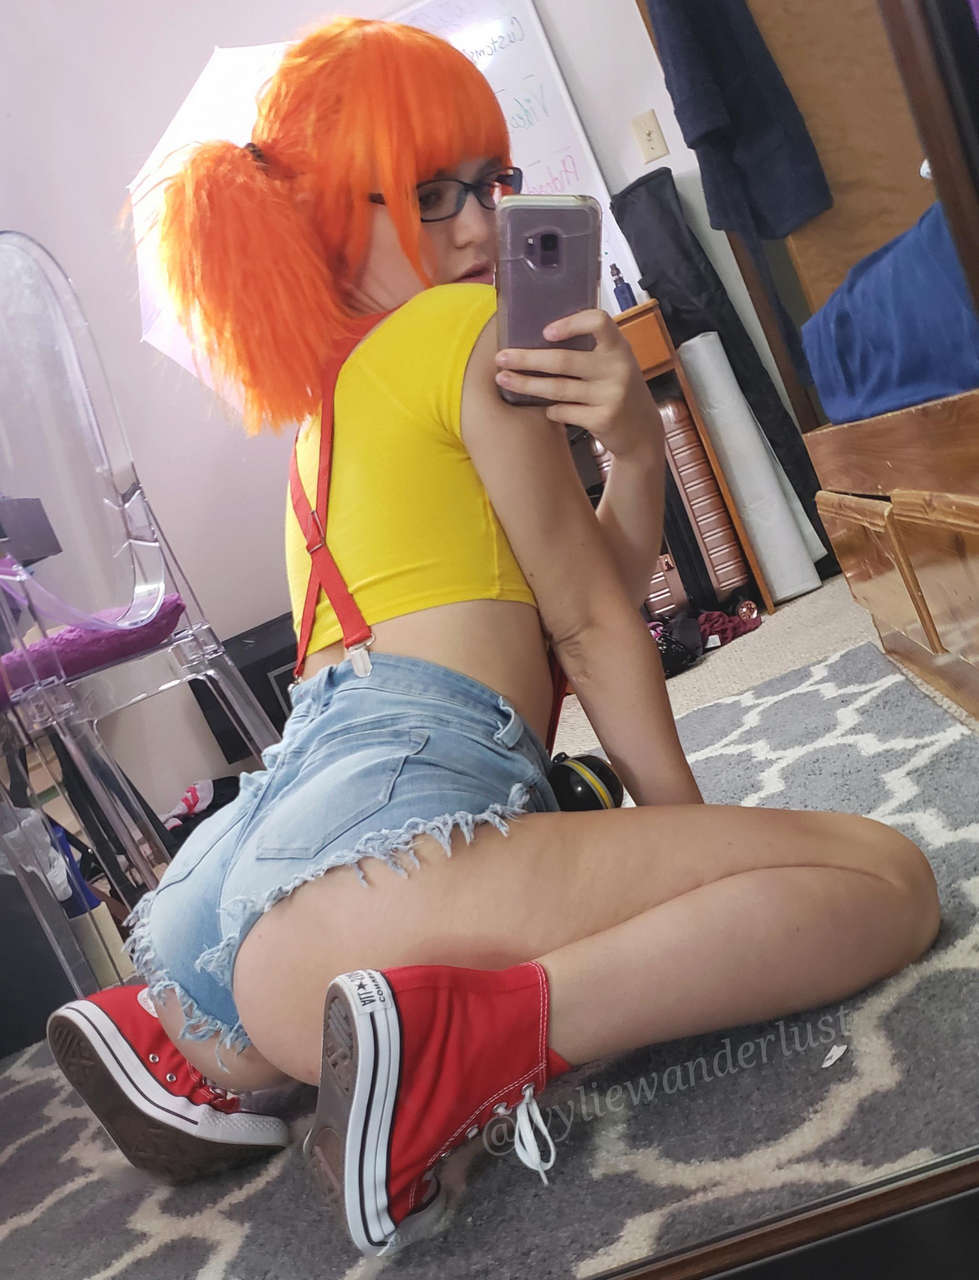 First Post Here Big Booty Misty By Littlewanderlus